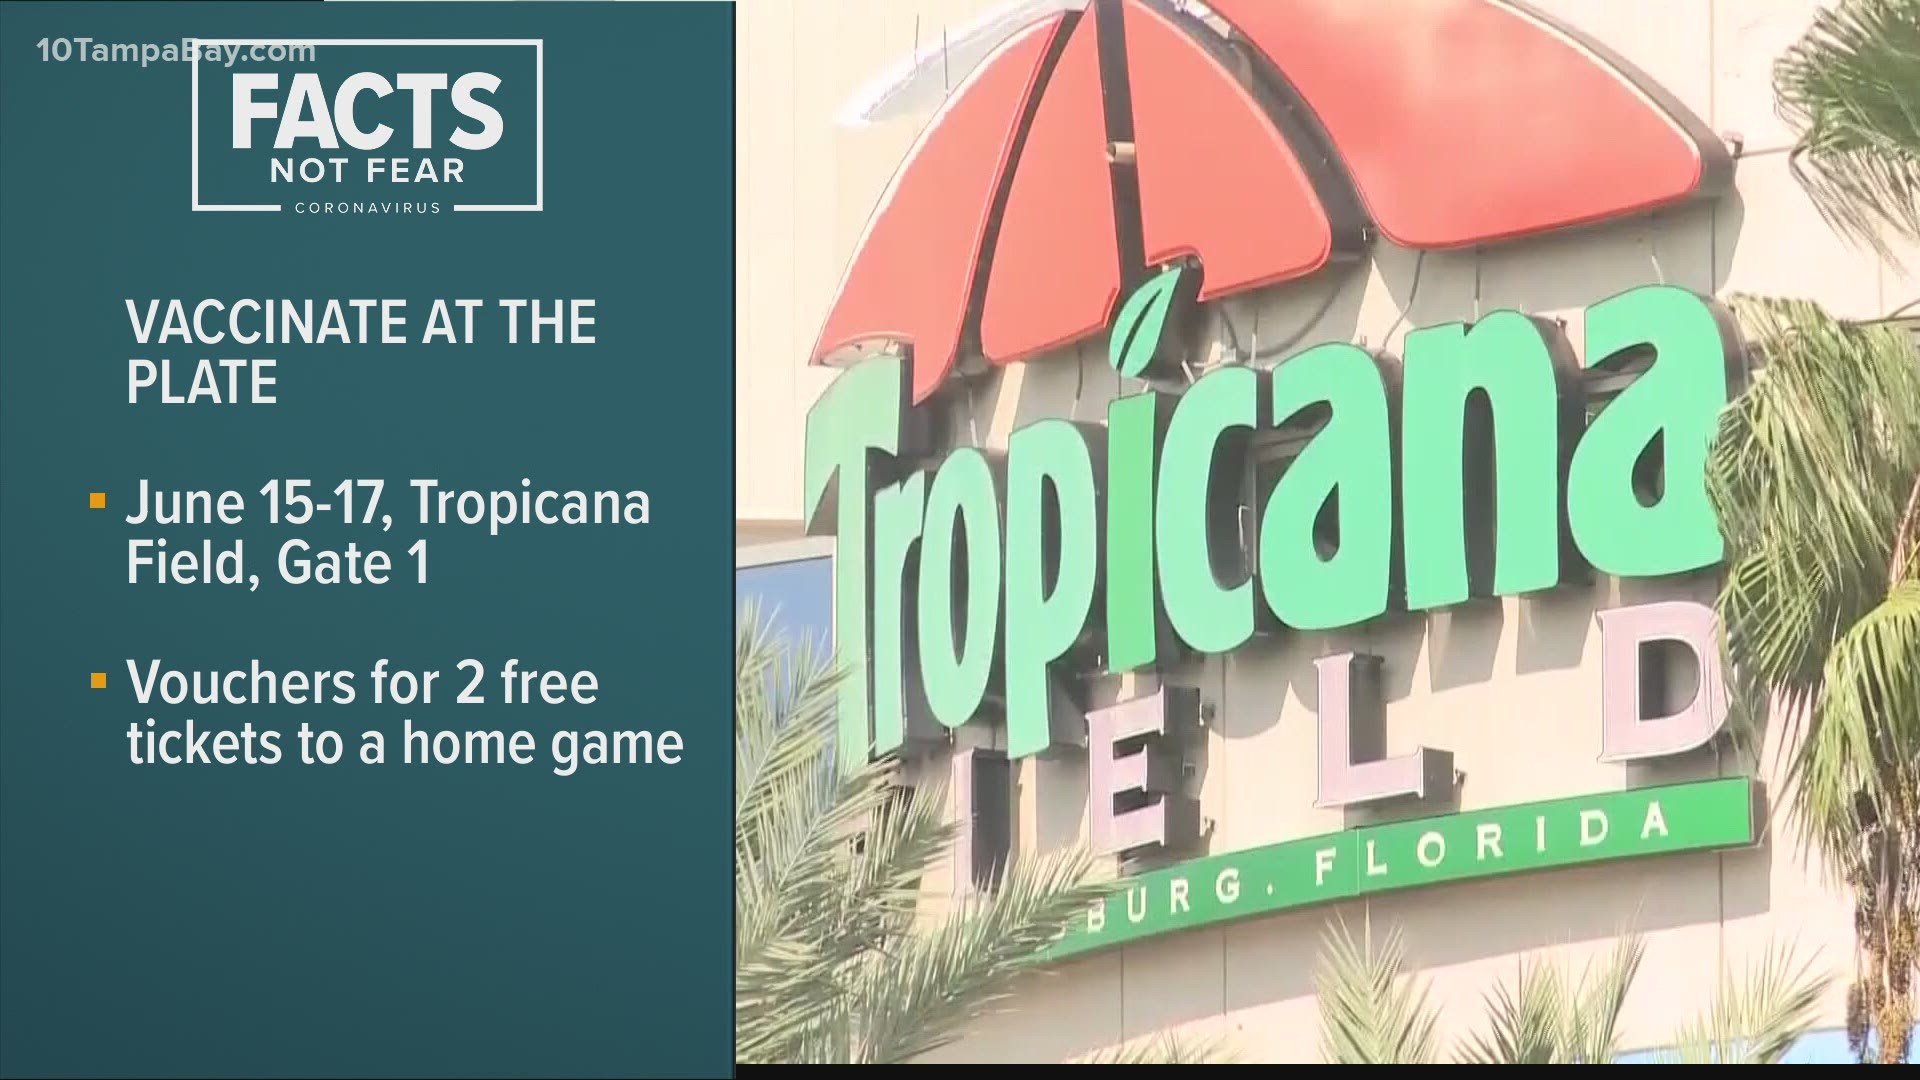 Tampa Bay Rays to up fan capacity at Tropicana Field to 25,000 in July